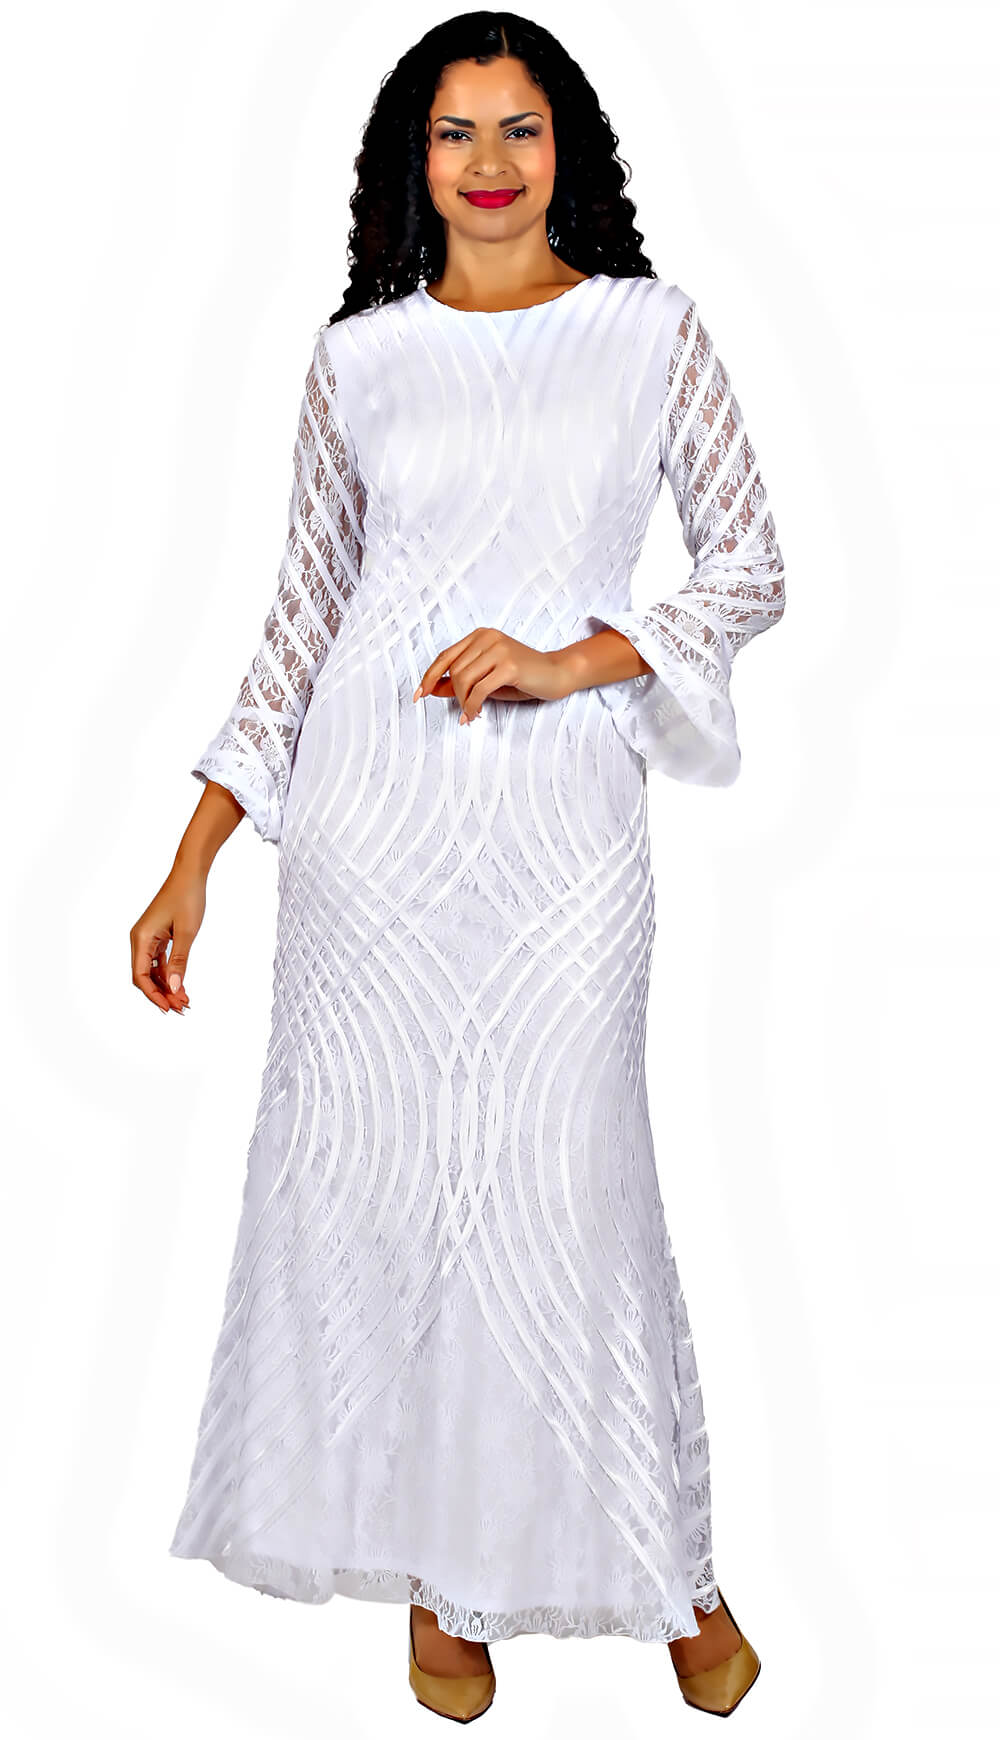 Diana Couture Dress 8737-White - Church Suits For Less